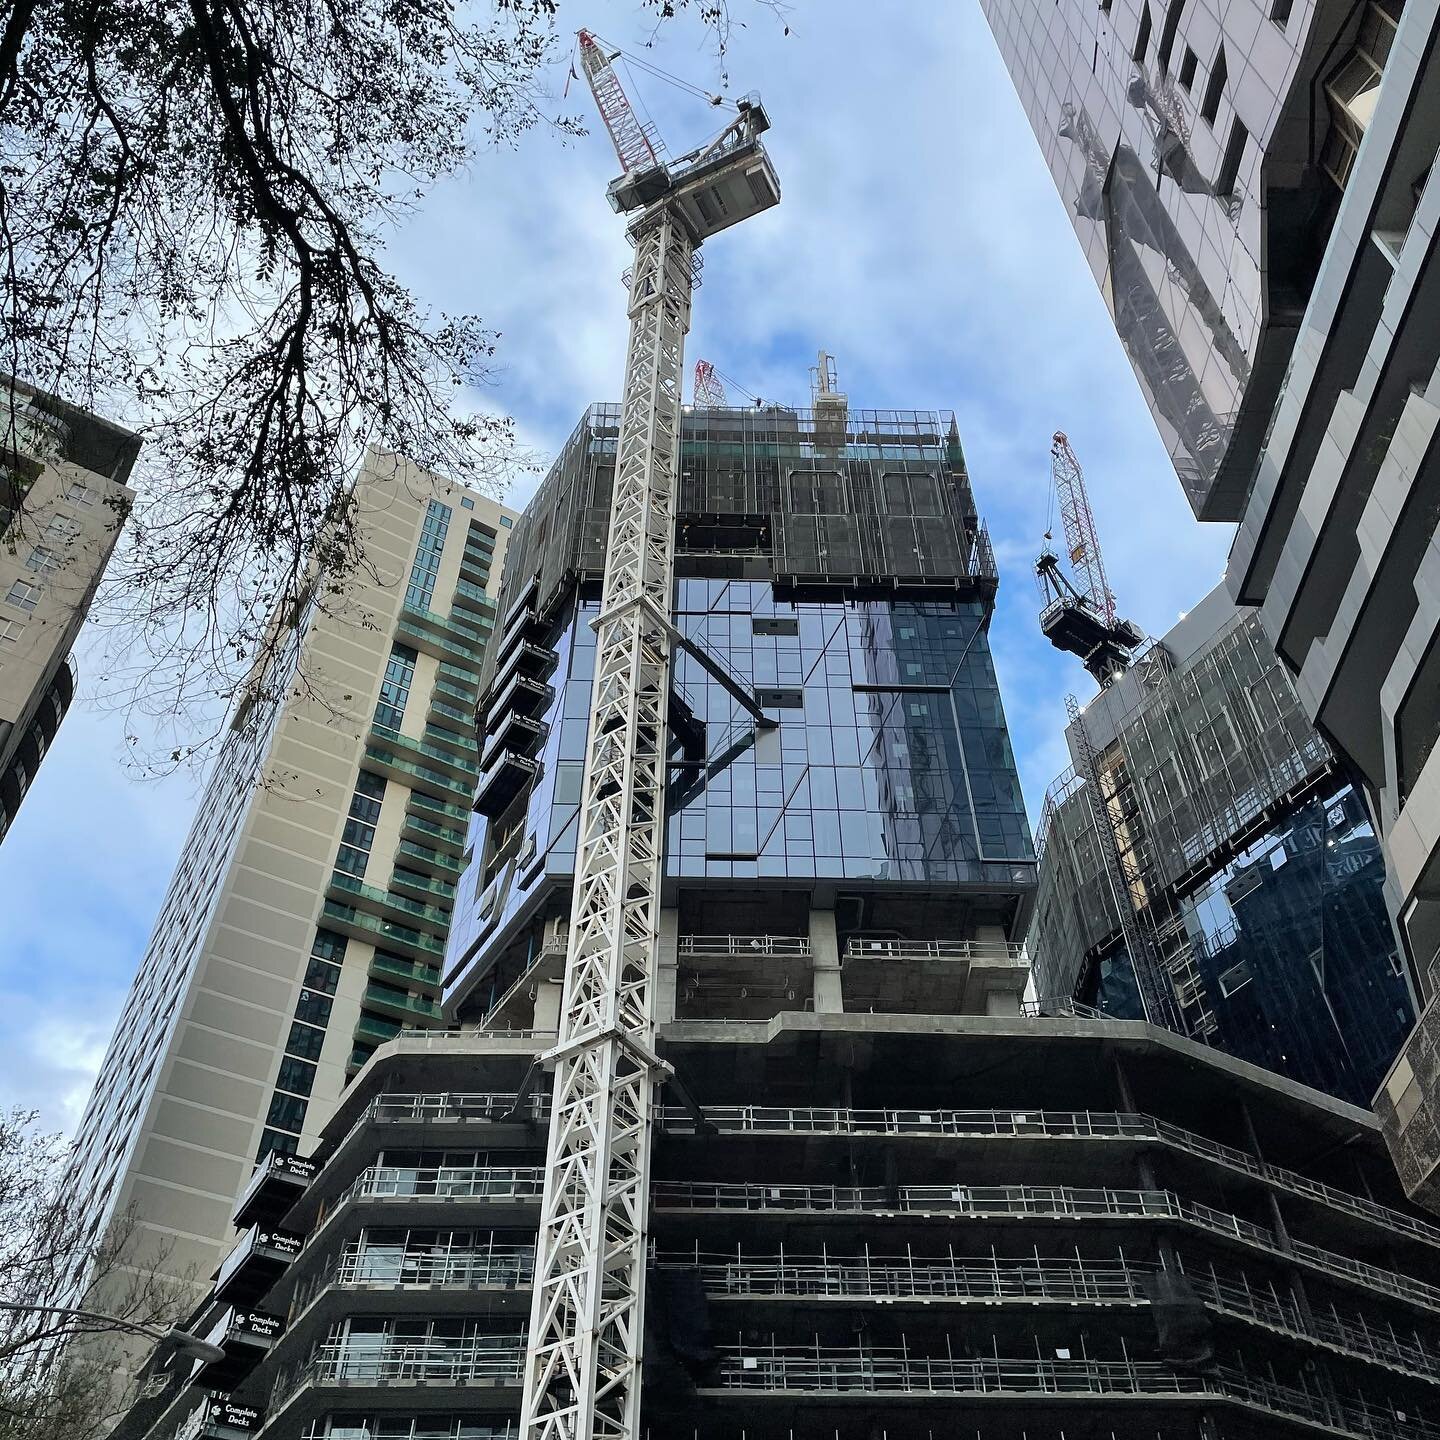 Stage 2 of West Side Place stretching up from the city streets. This is towers 3 and 4, the final pieces of an historic development for Melbourne. SAFELEC are delivering high speed fibre connections and integration of building services to the whole d